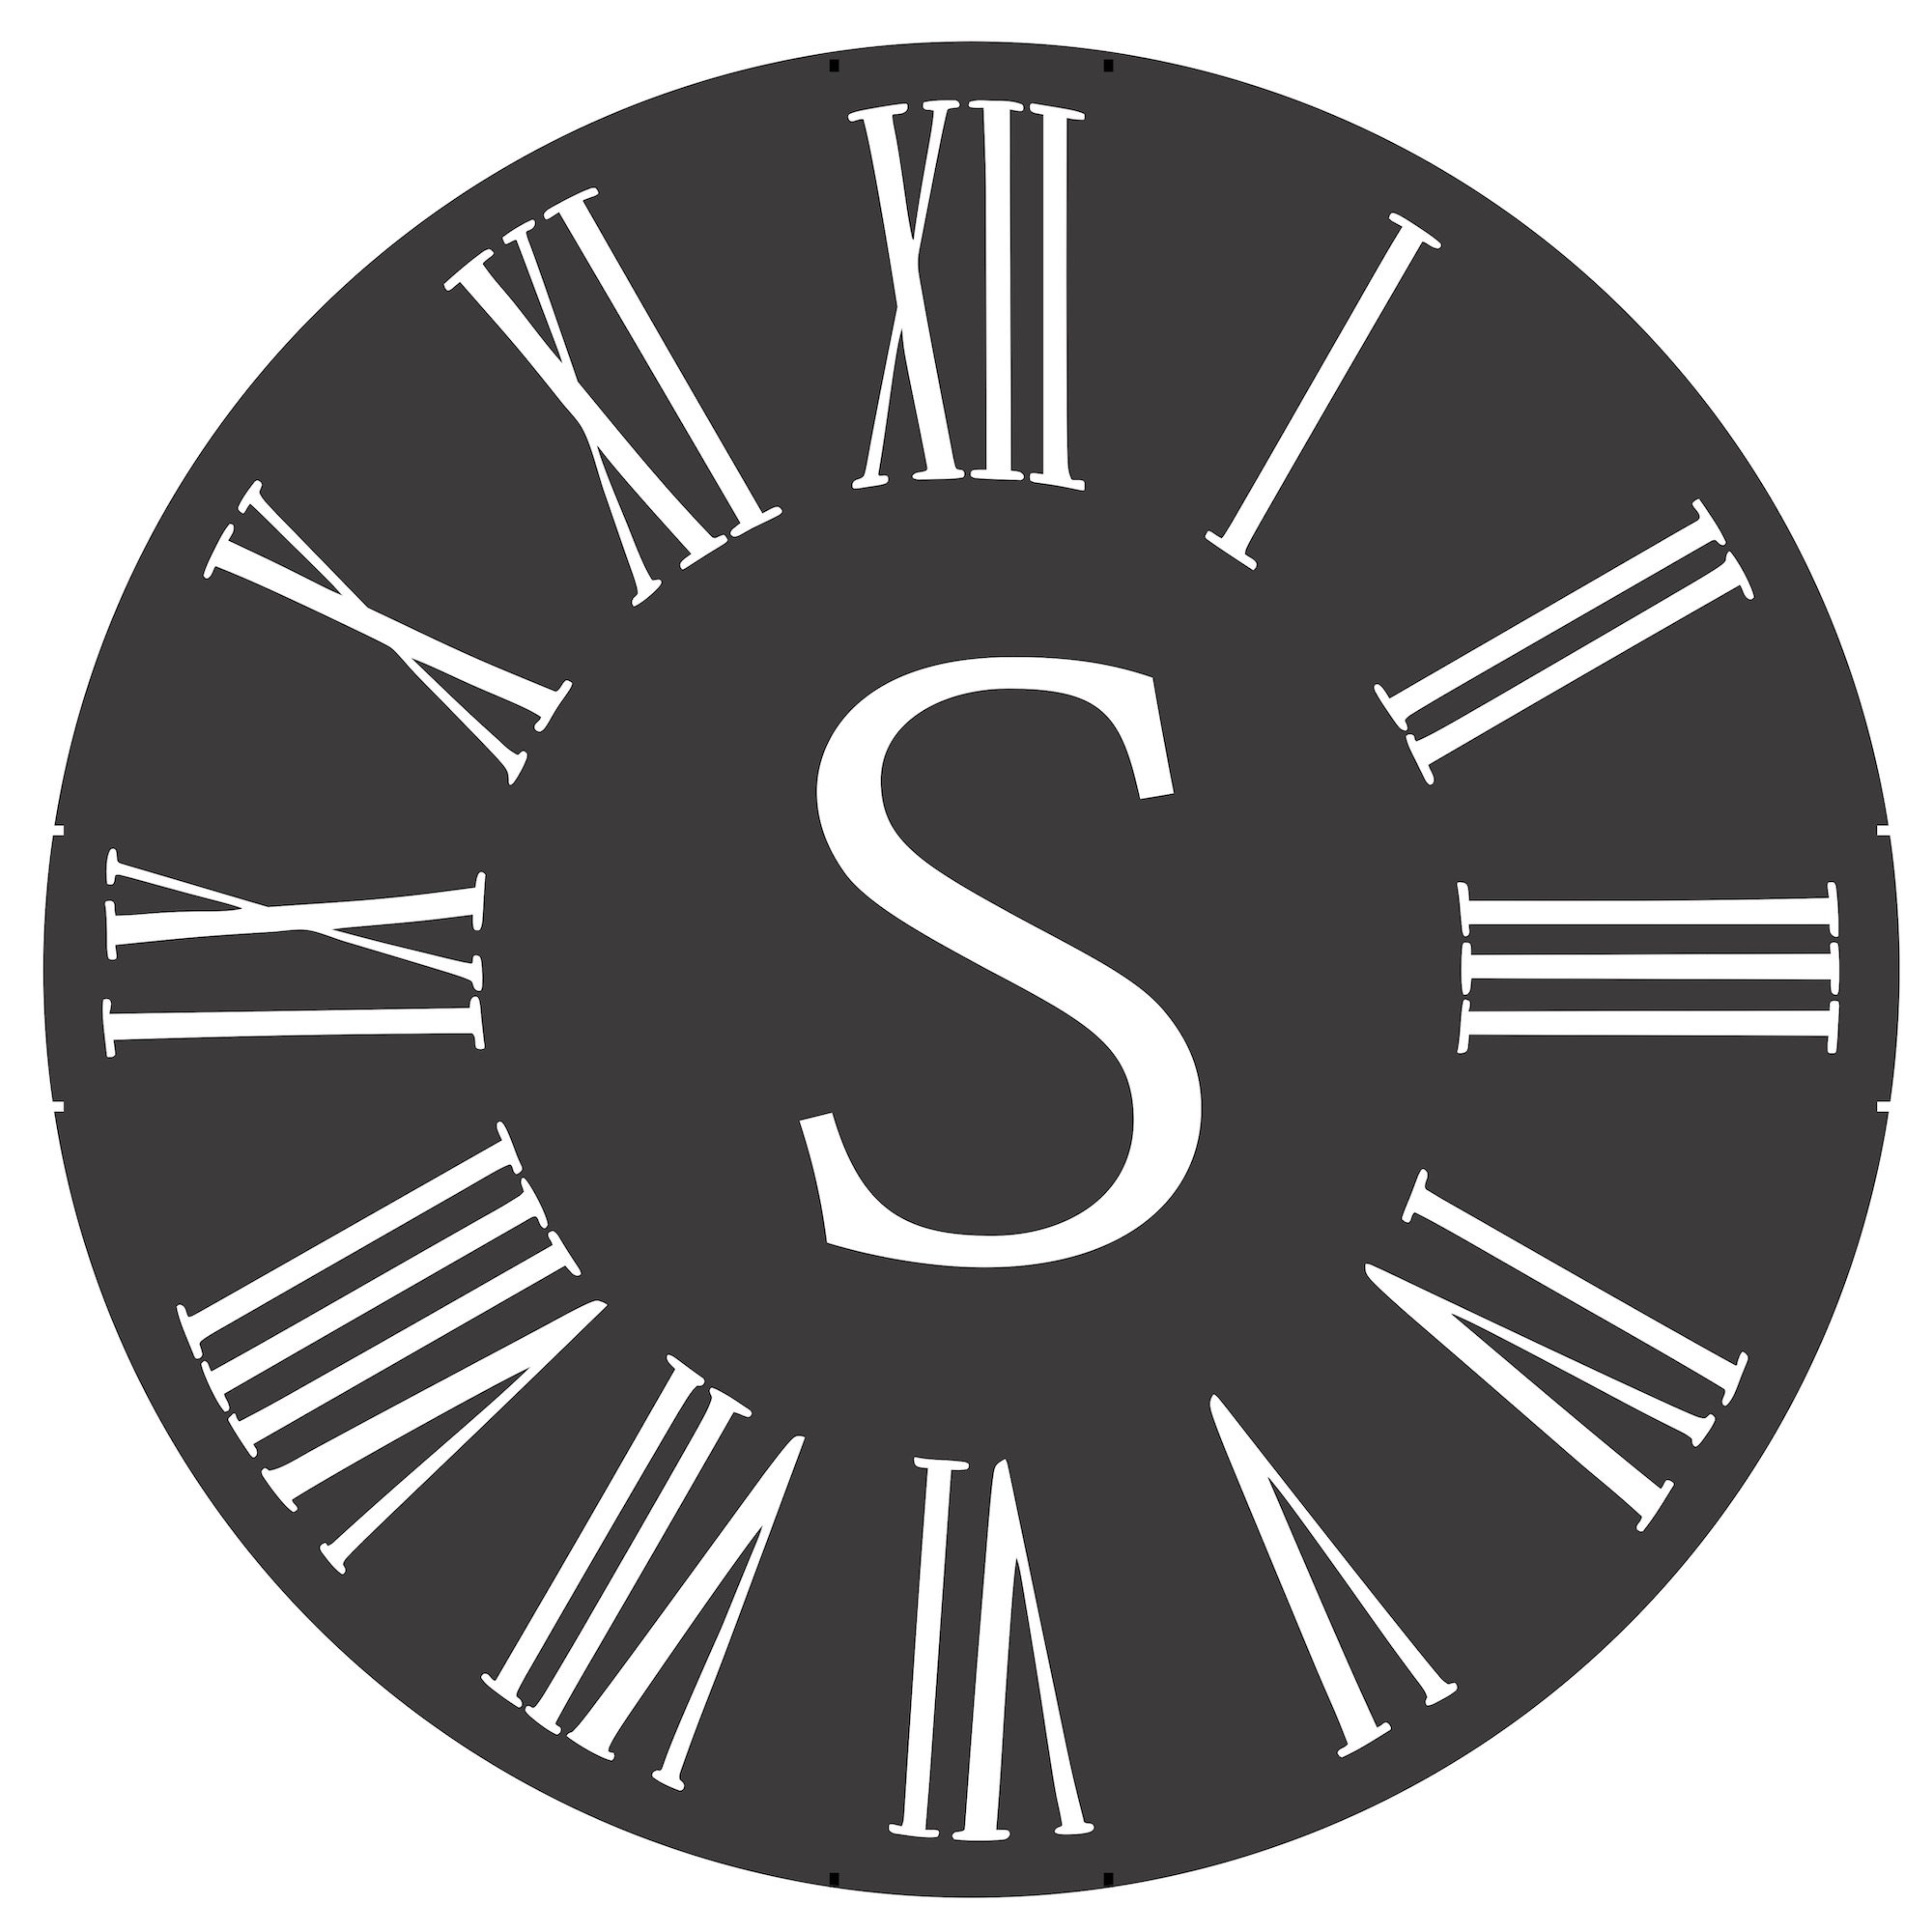 clock with initial.jpg